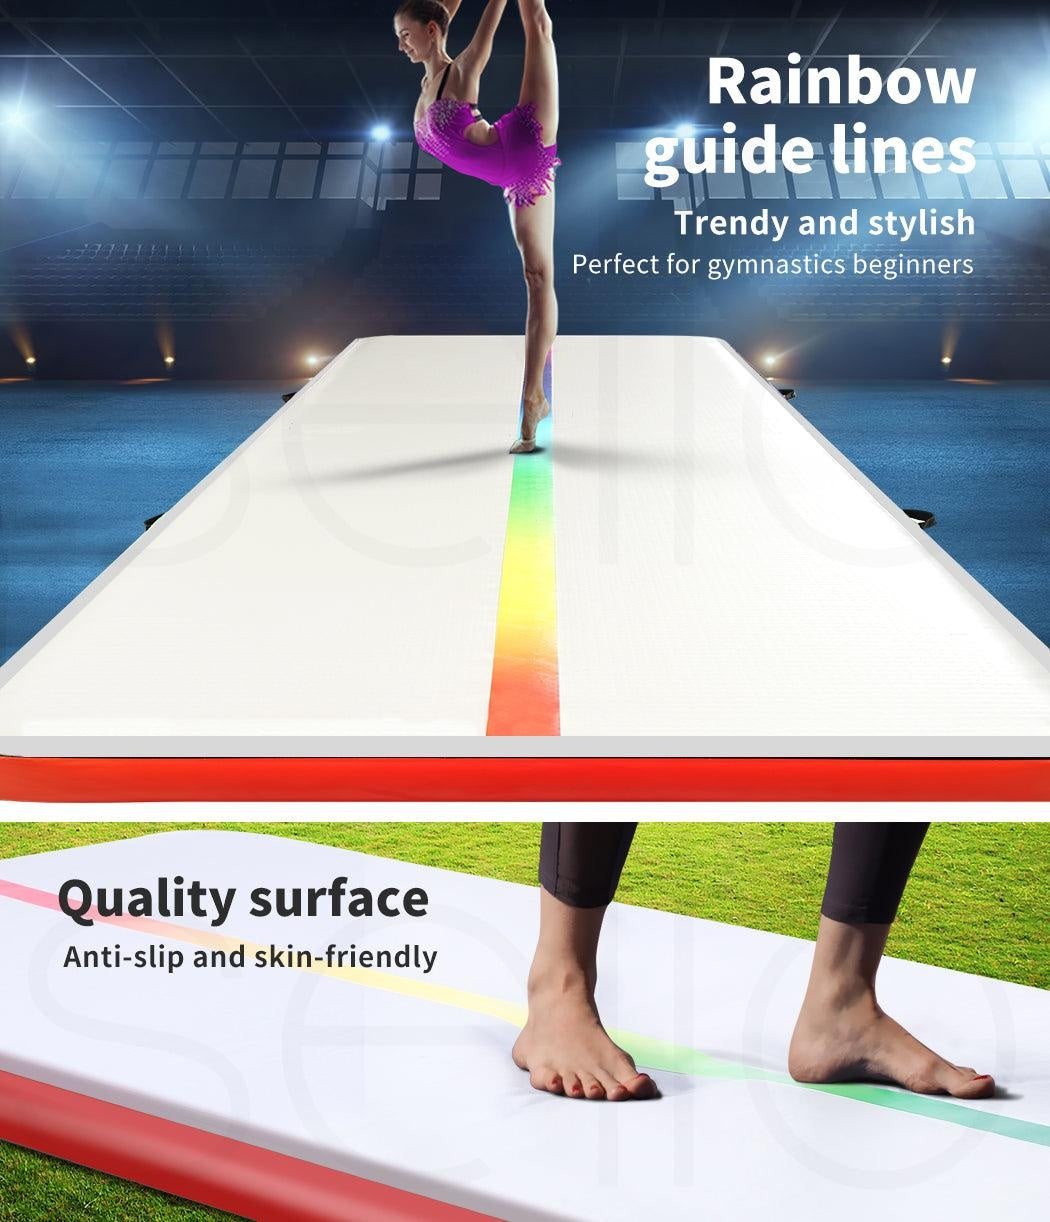 4x1M Inflatable Air Track Mat Tumbling Pump Floor Home Gymnastics Gym in Red Deals499